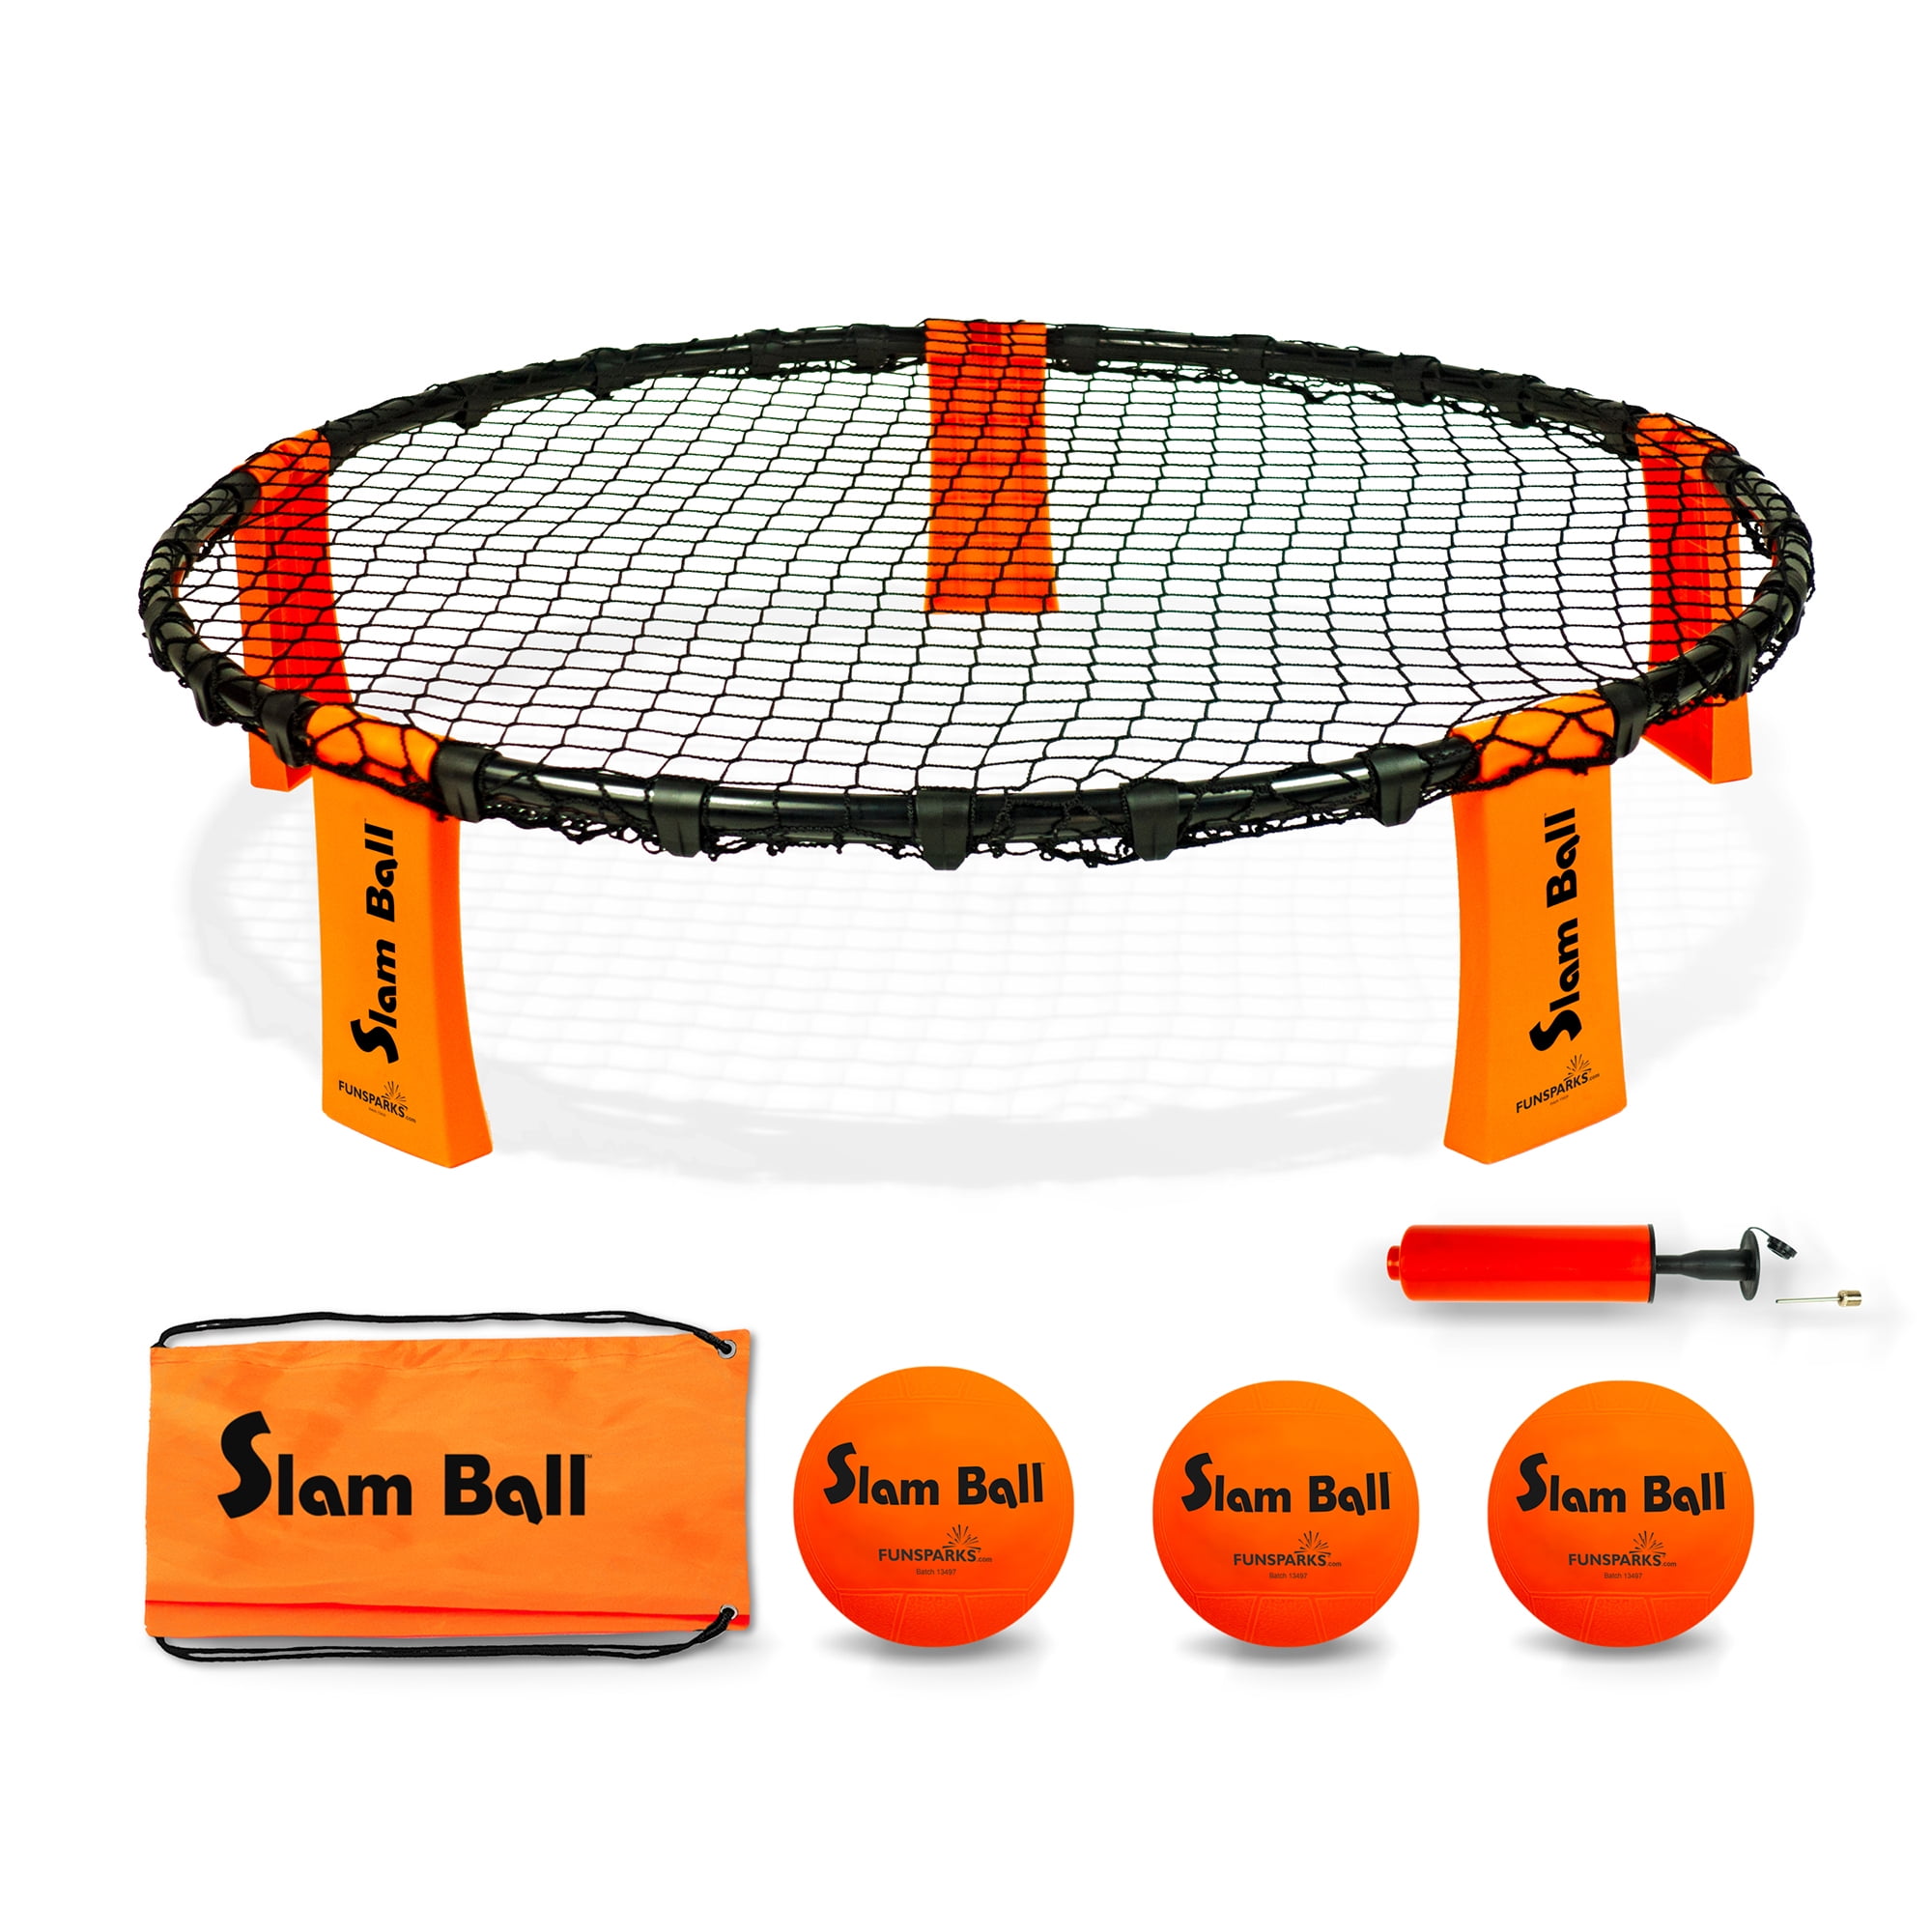 Funsparks - Slam Ball Game - Spike The Ball into The Net at a Park, Beach, Lawn and Backyard - Rally, Set, Smash or Spike Game - Playing Net, 3 Balls,